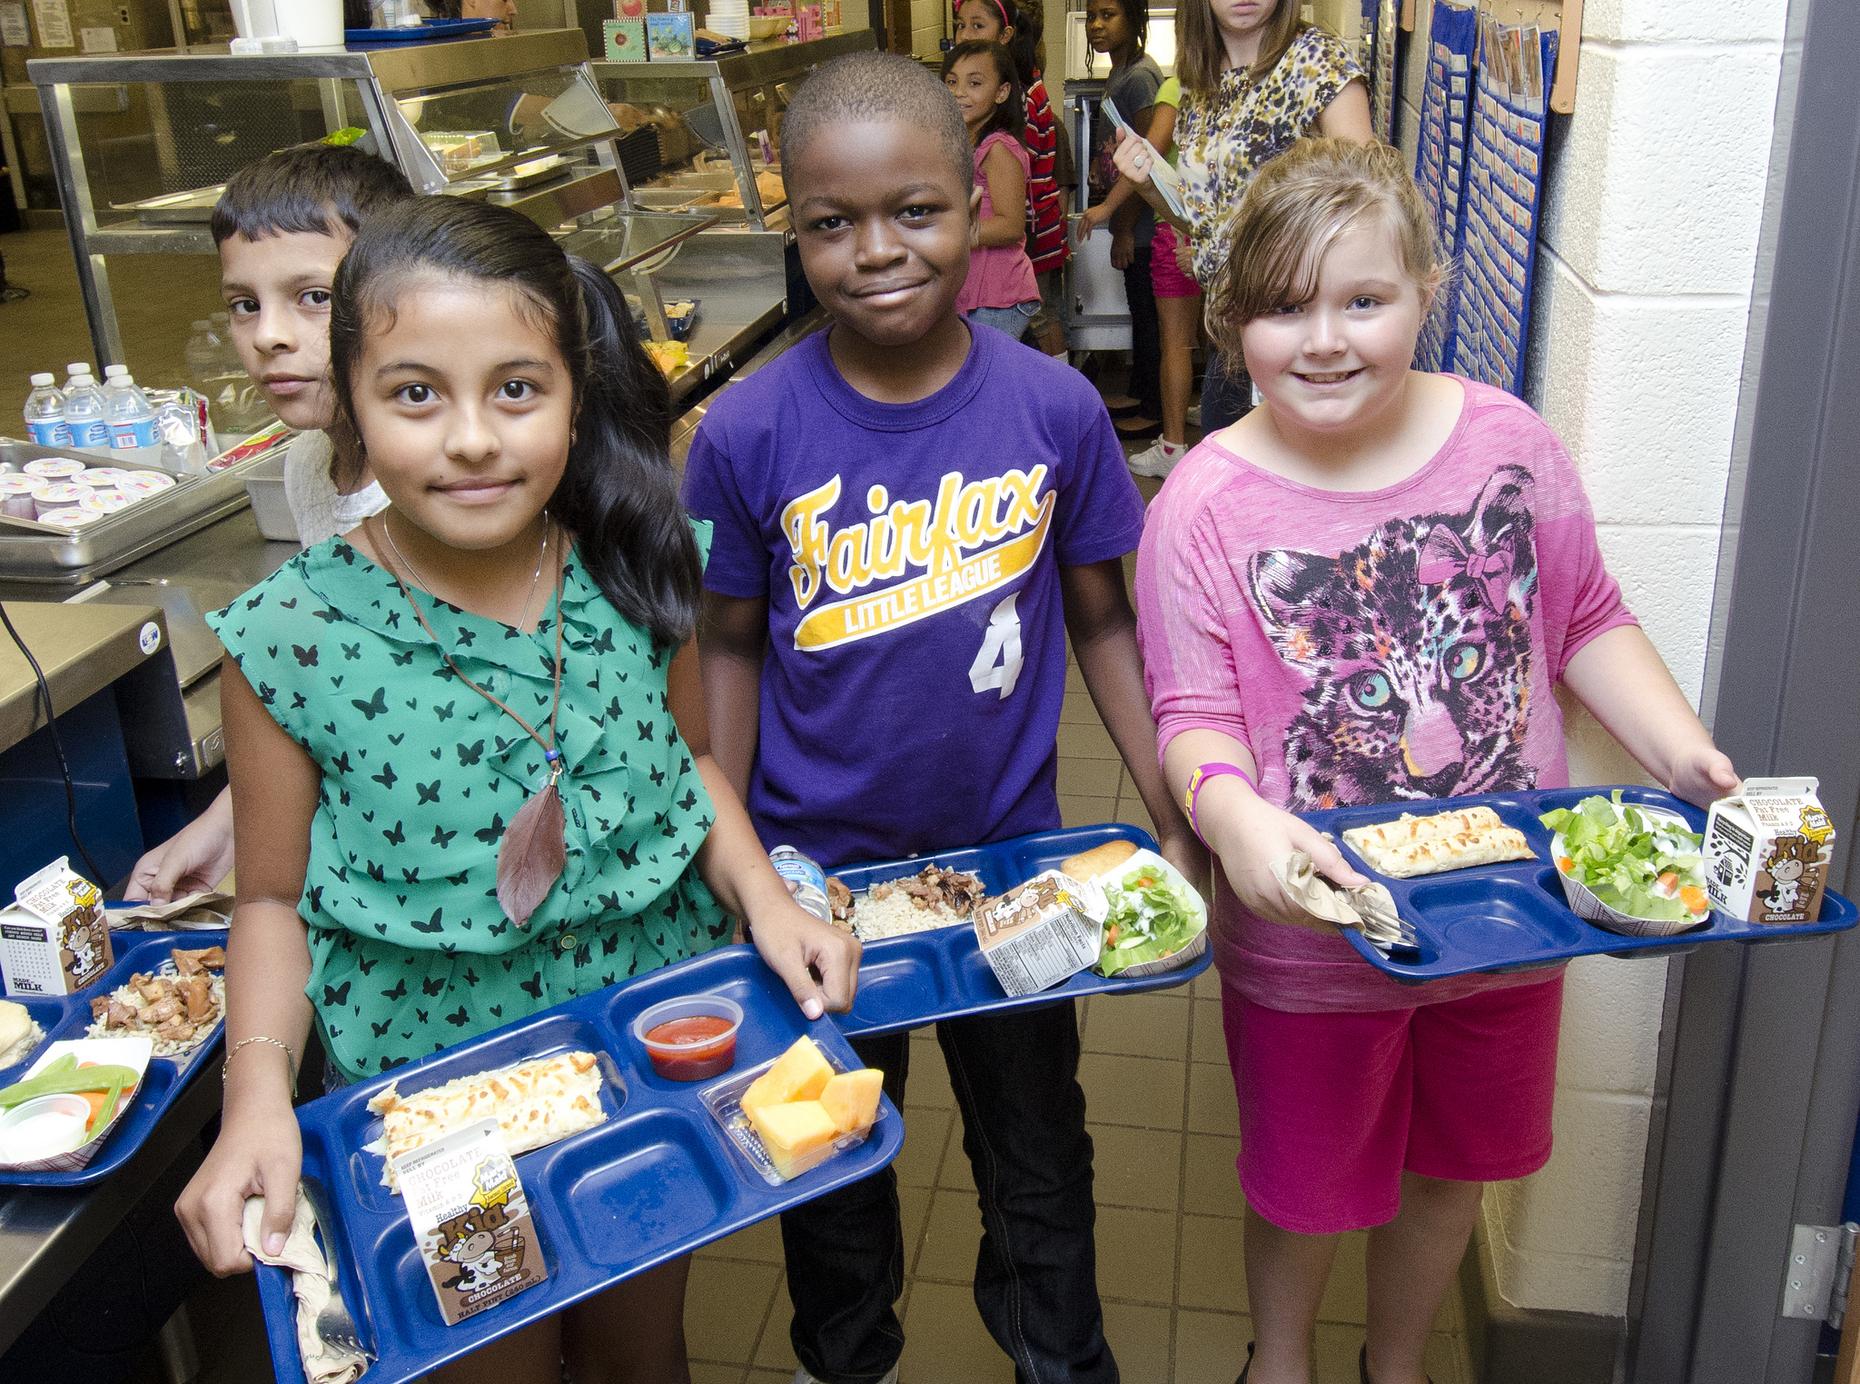 NYC Fights Poverty and Stigma With Free School Lunches for All The